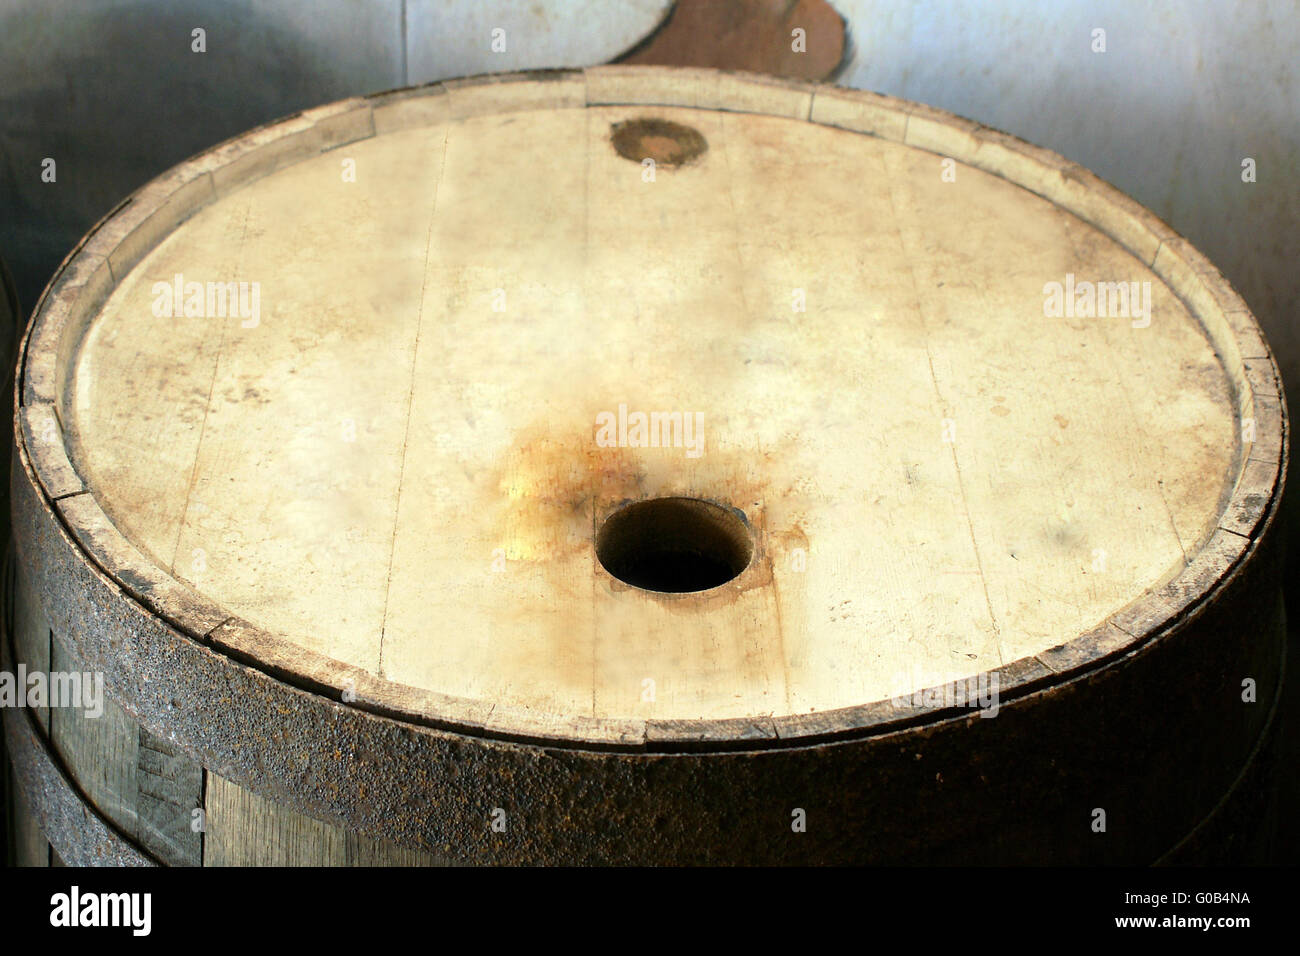 close-up picture of the upper part of a rum-barrel Stock Photo